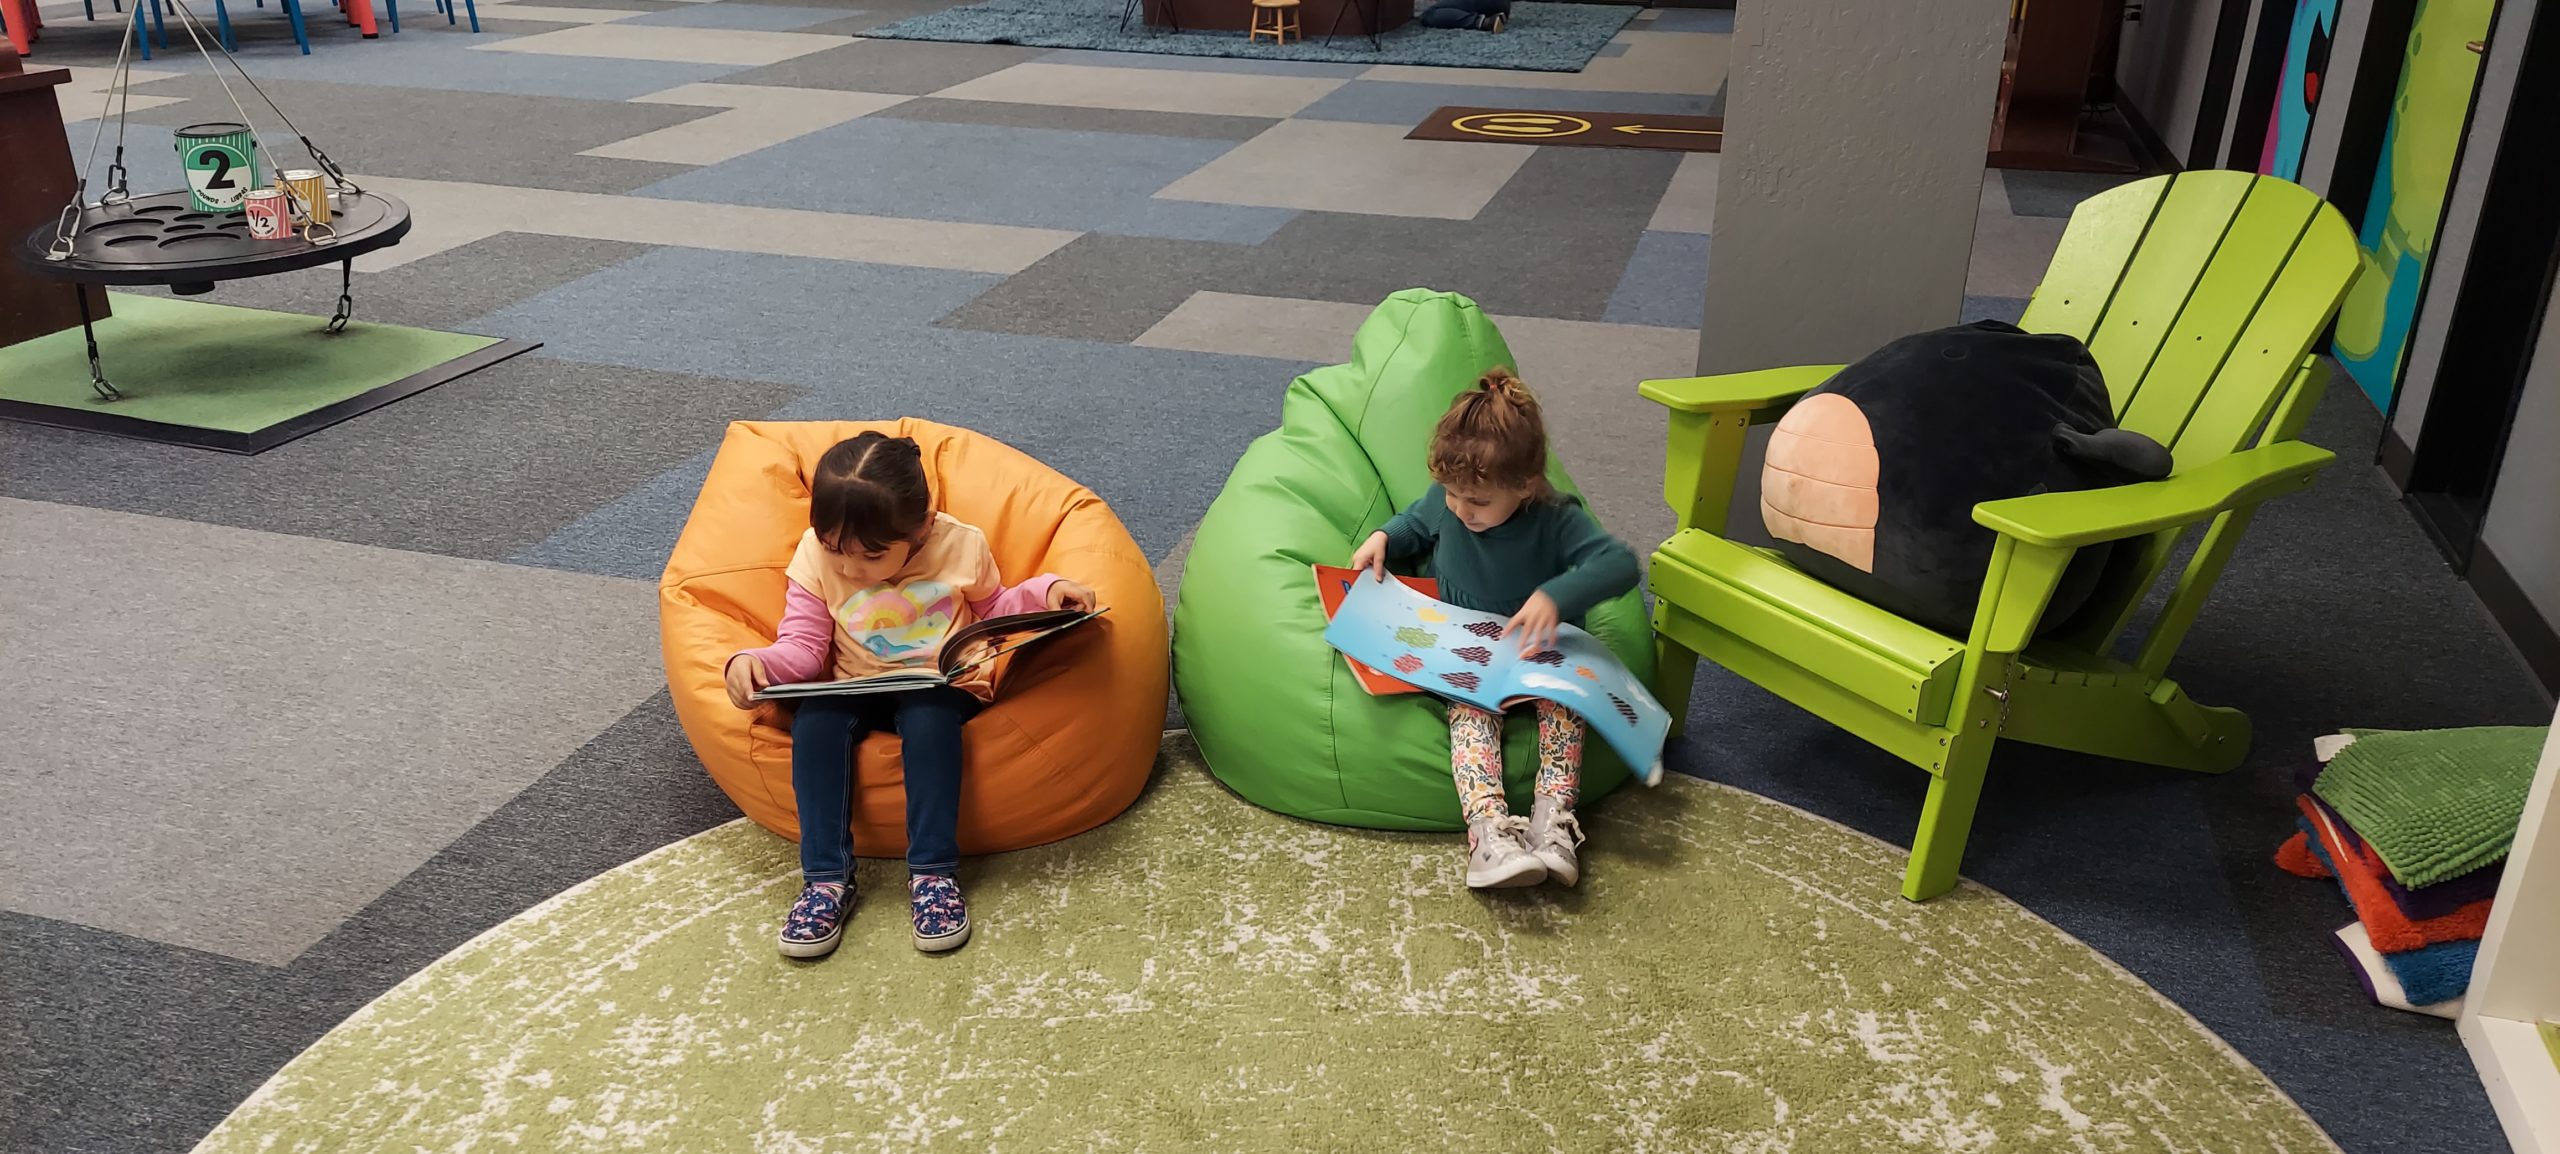 Two young girls read books while sitting on beanbag chairs next to a large green folding chair